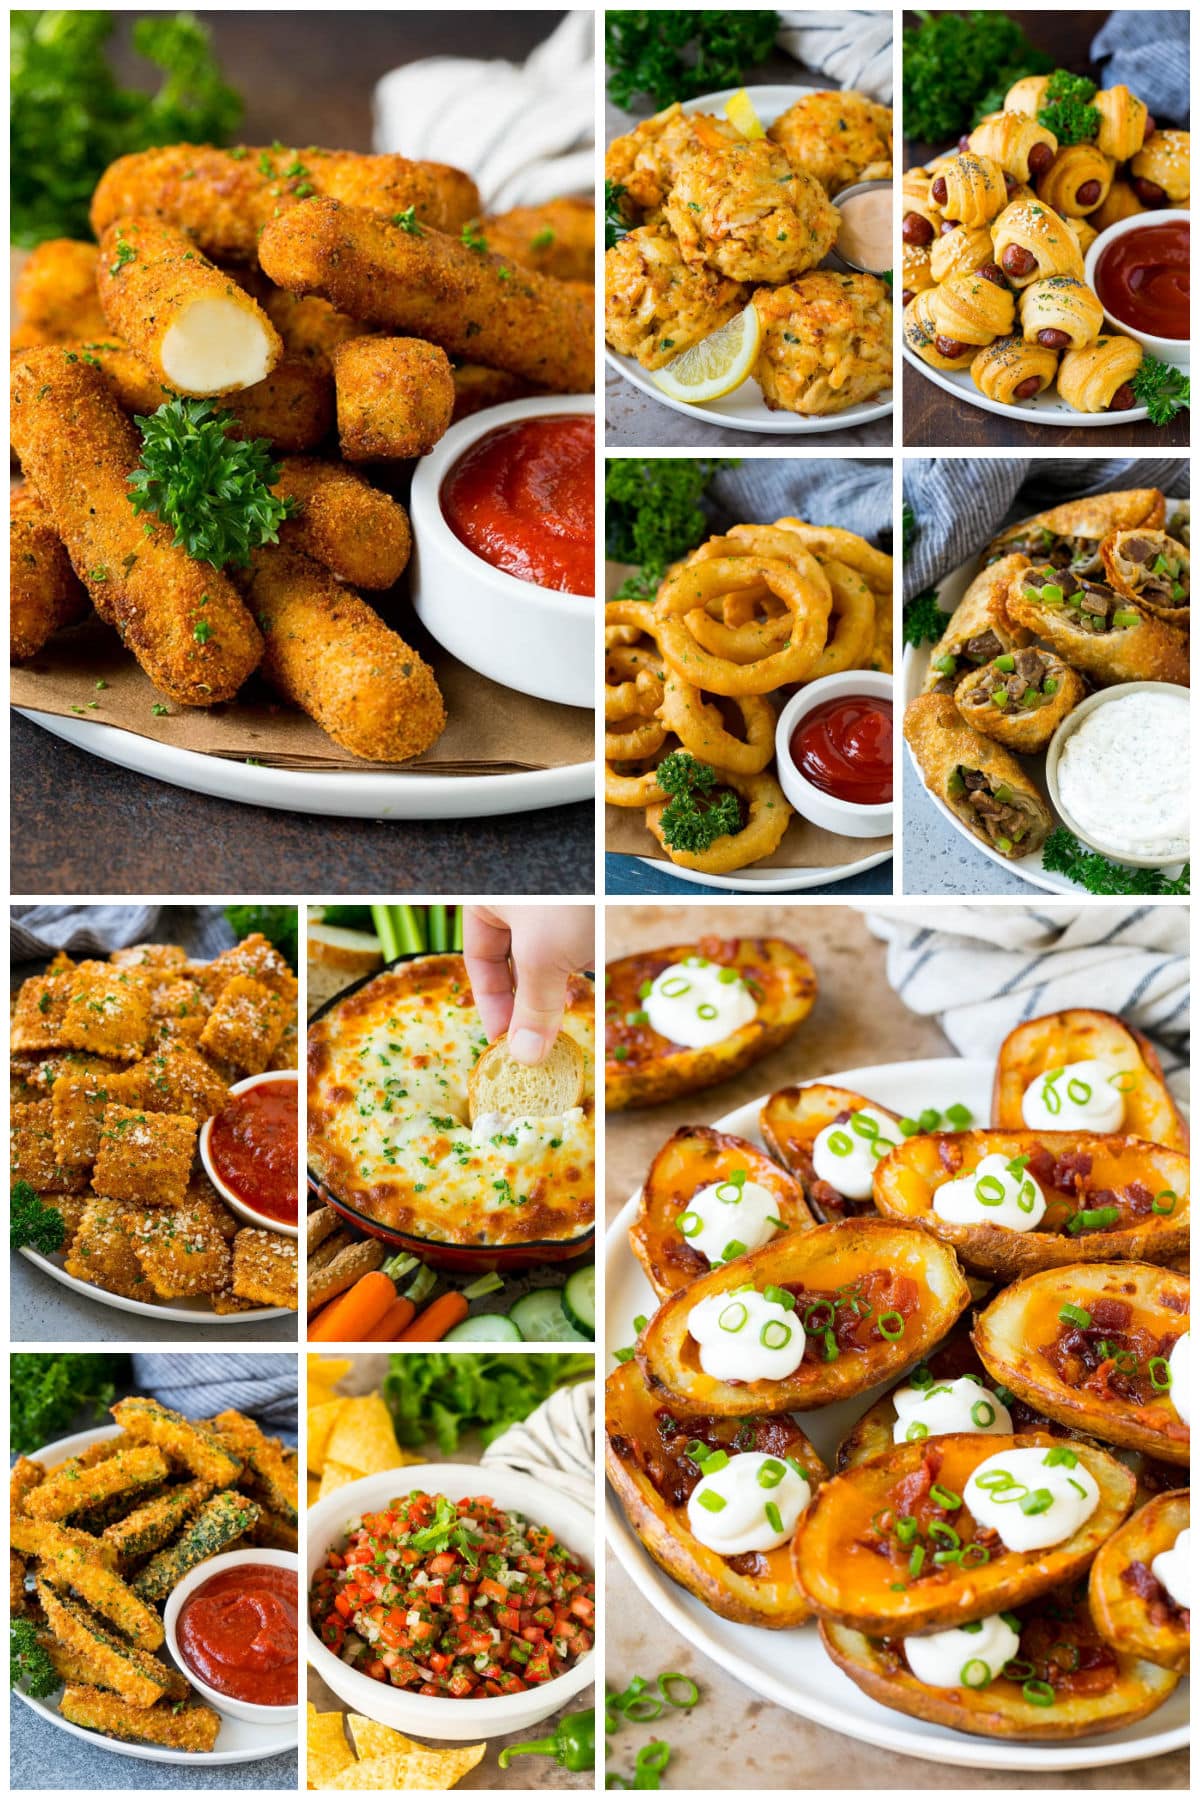 Several images of dishes for the big game like mozzarella sticks, potato skins and fried zucchini.